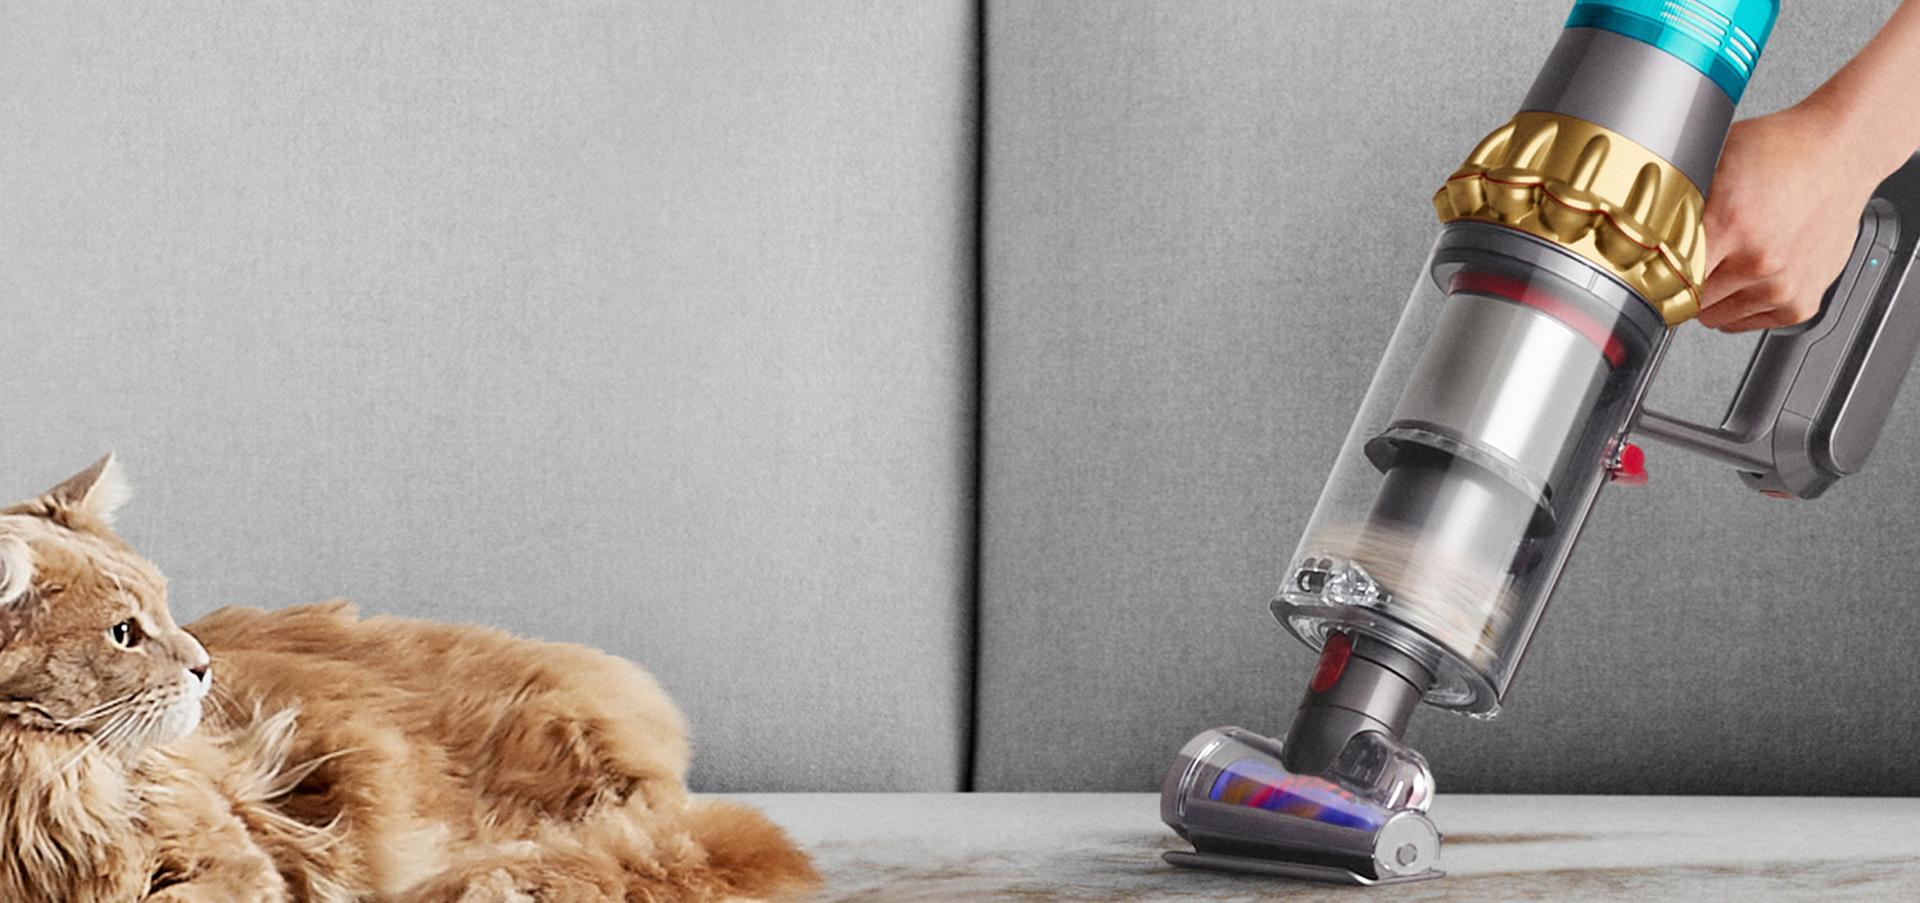 Dyson V15s with Hair screw tool in handheld mode removes fur from a sofa while a cat sits nearby.